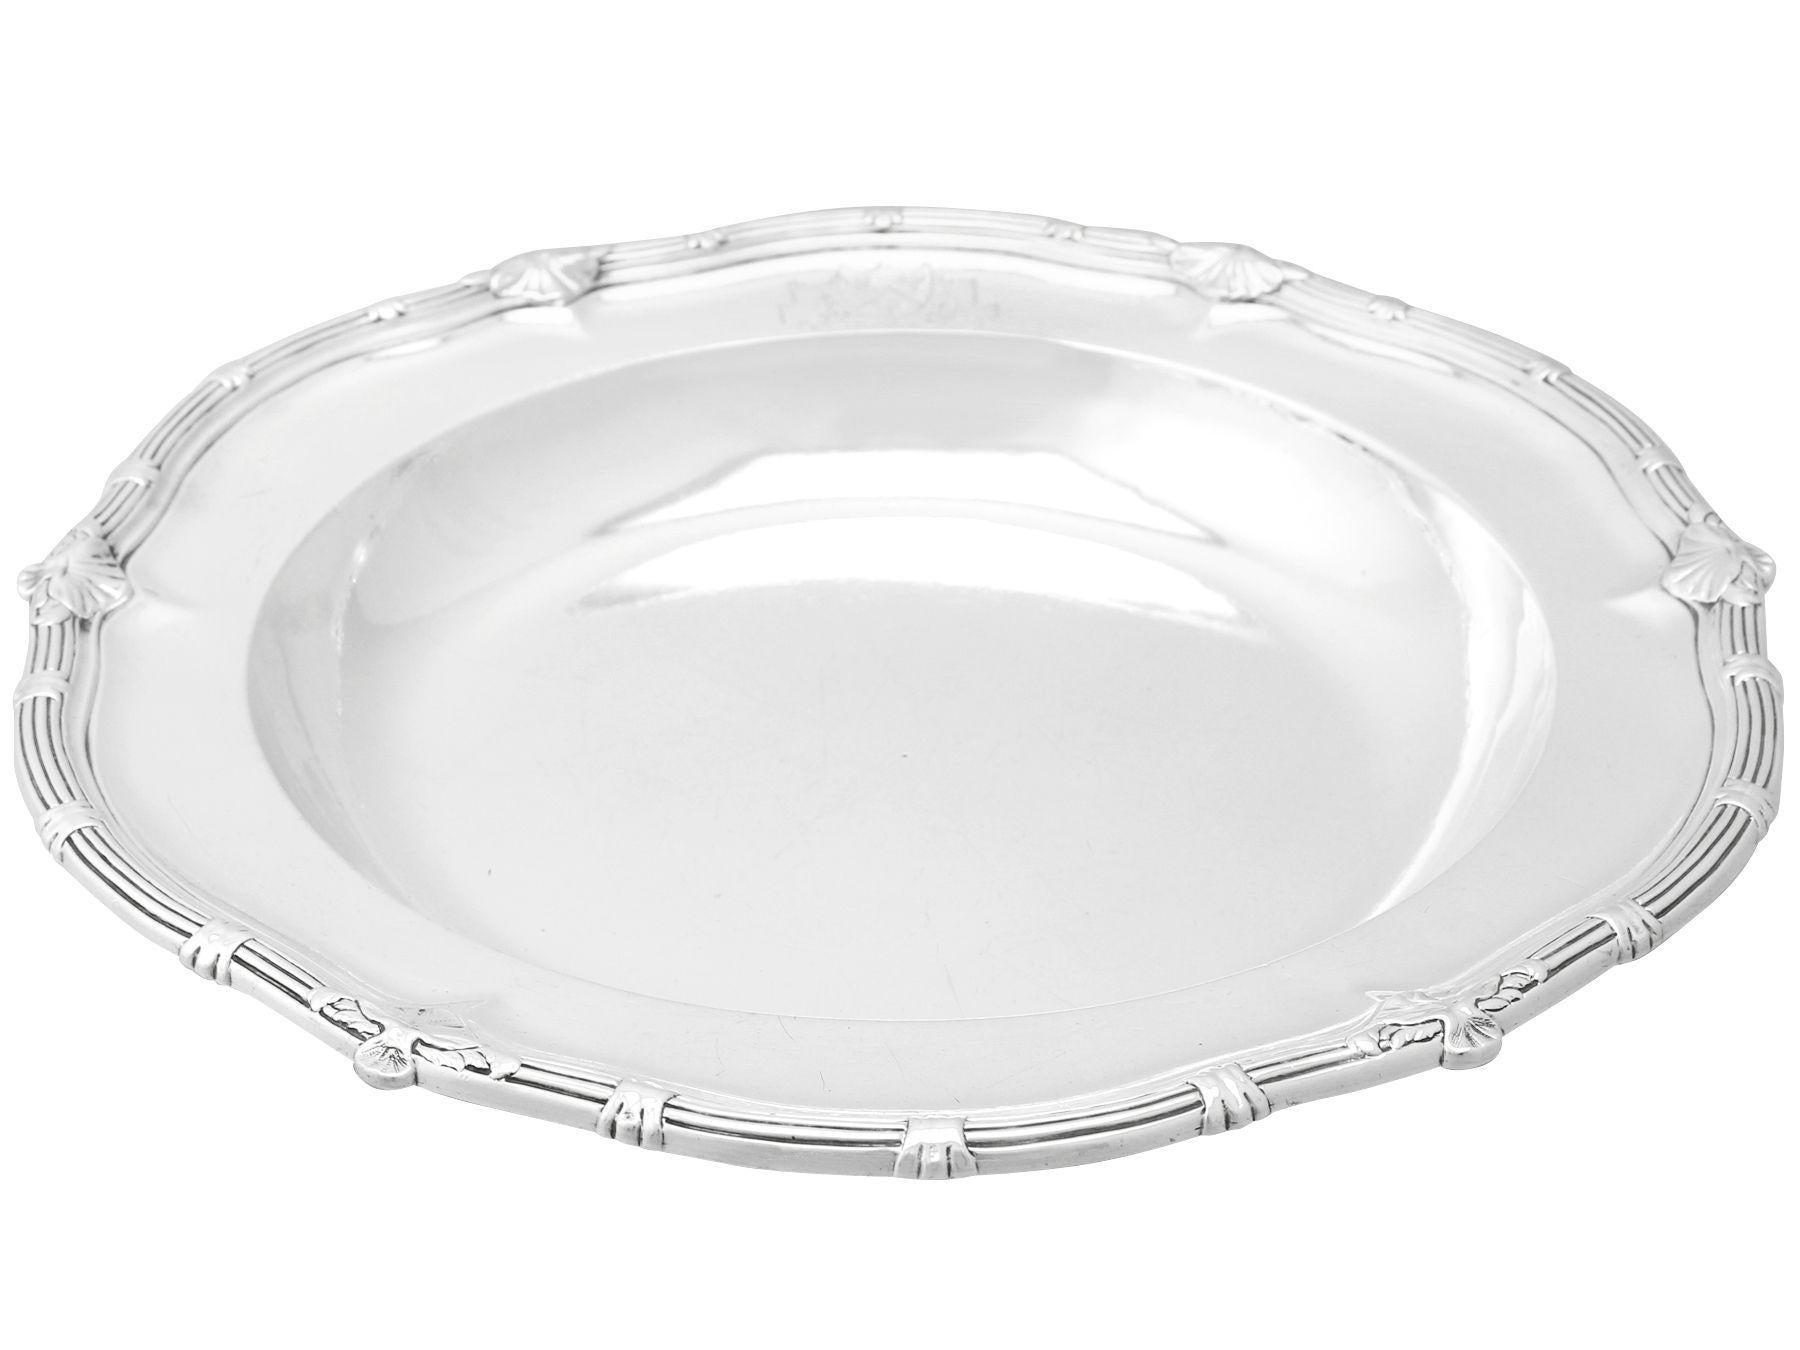 An exceptional, fine and impressive antique George II English sterling silver serving dish made by Paul de Lamerie; an addition to our Georgian dining silverware collection.

This exceptional George II sterling silver serving dish has a plain